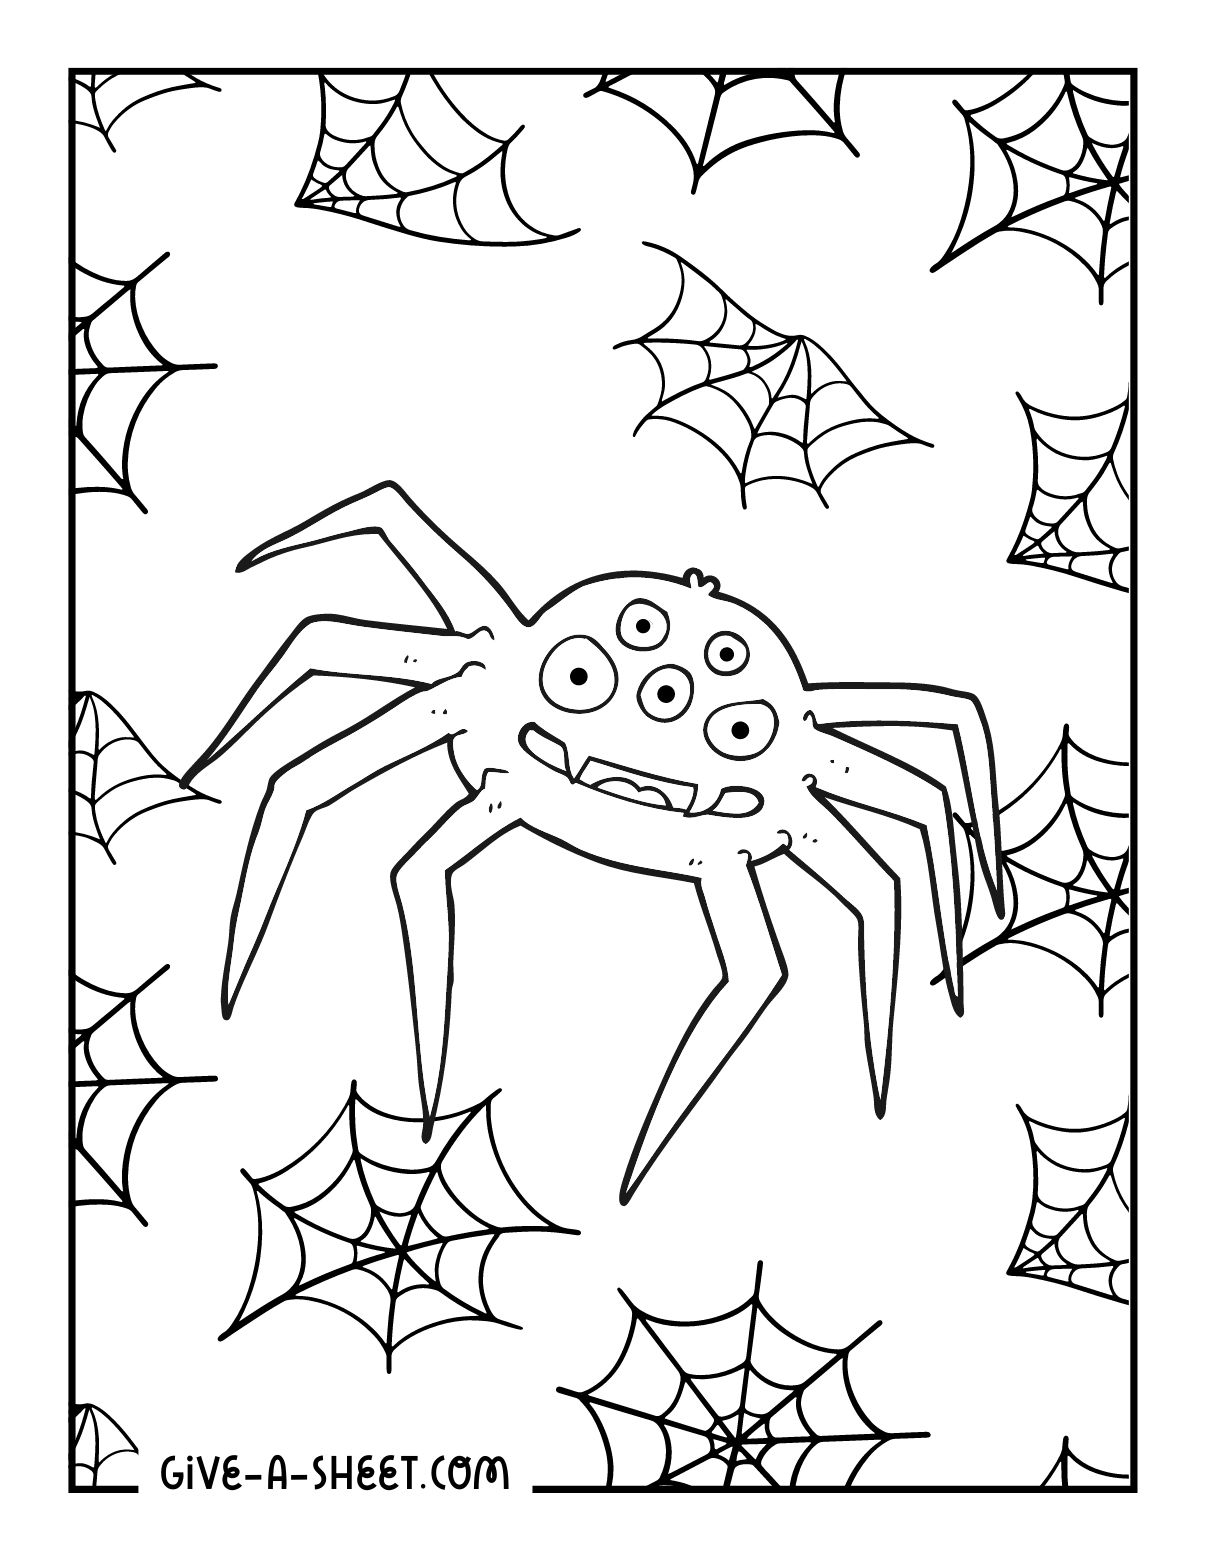 Monster tarantula coloring pages for kids.